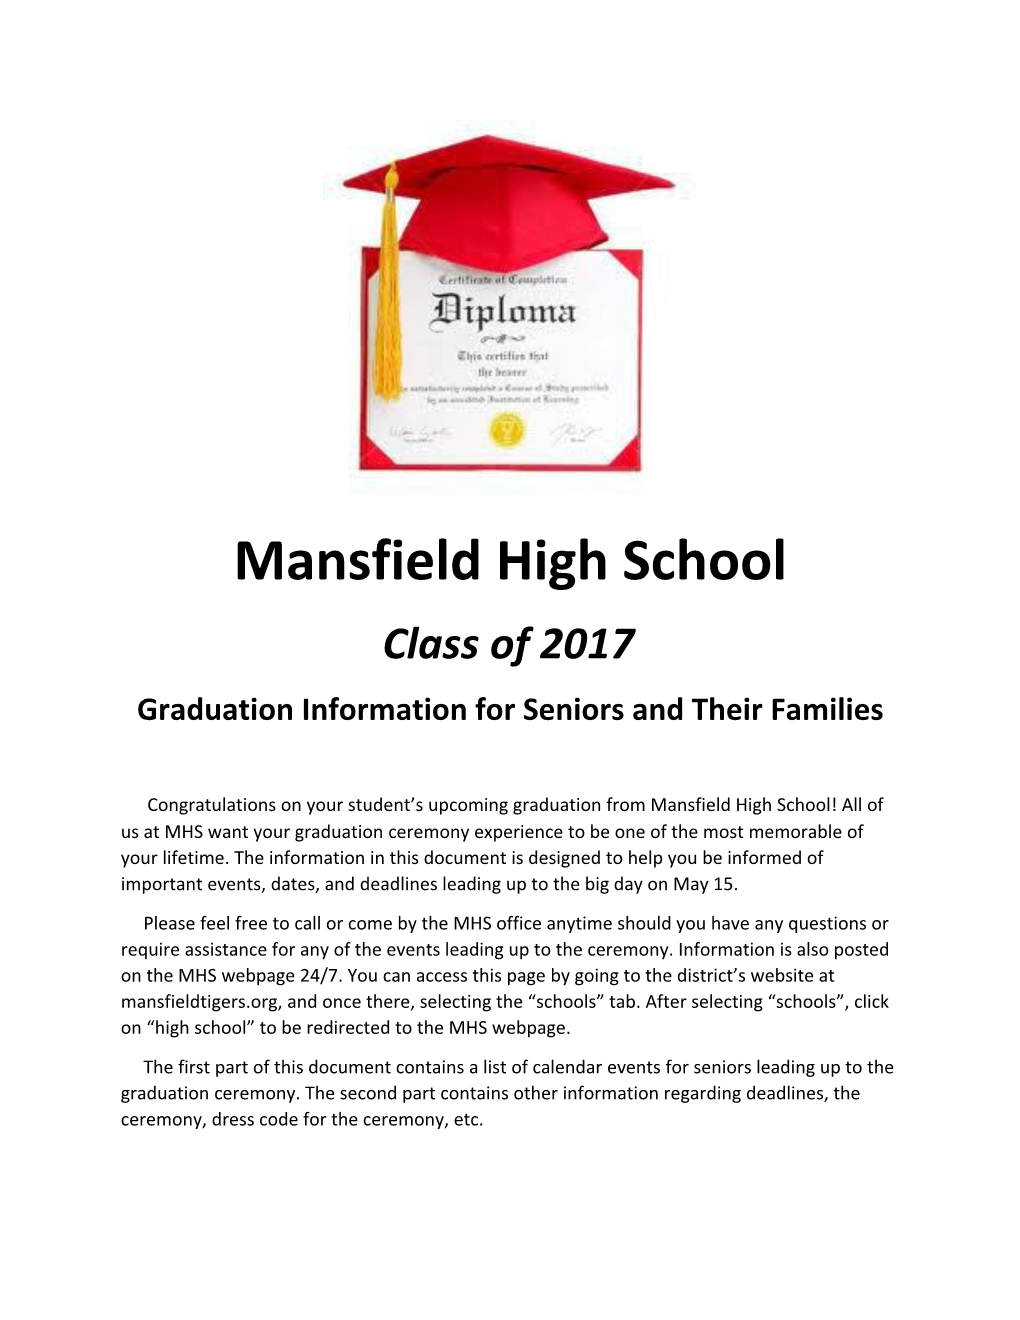 Graduation Information for Seniors and Their Families